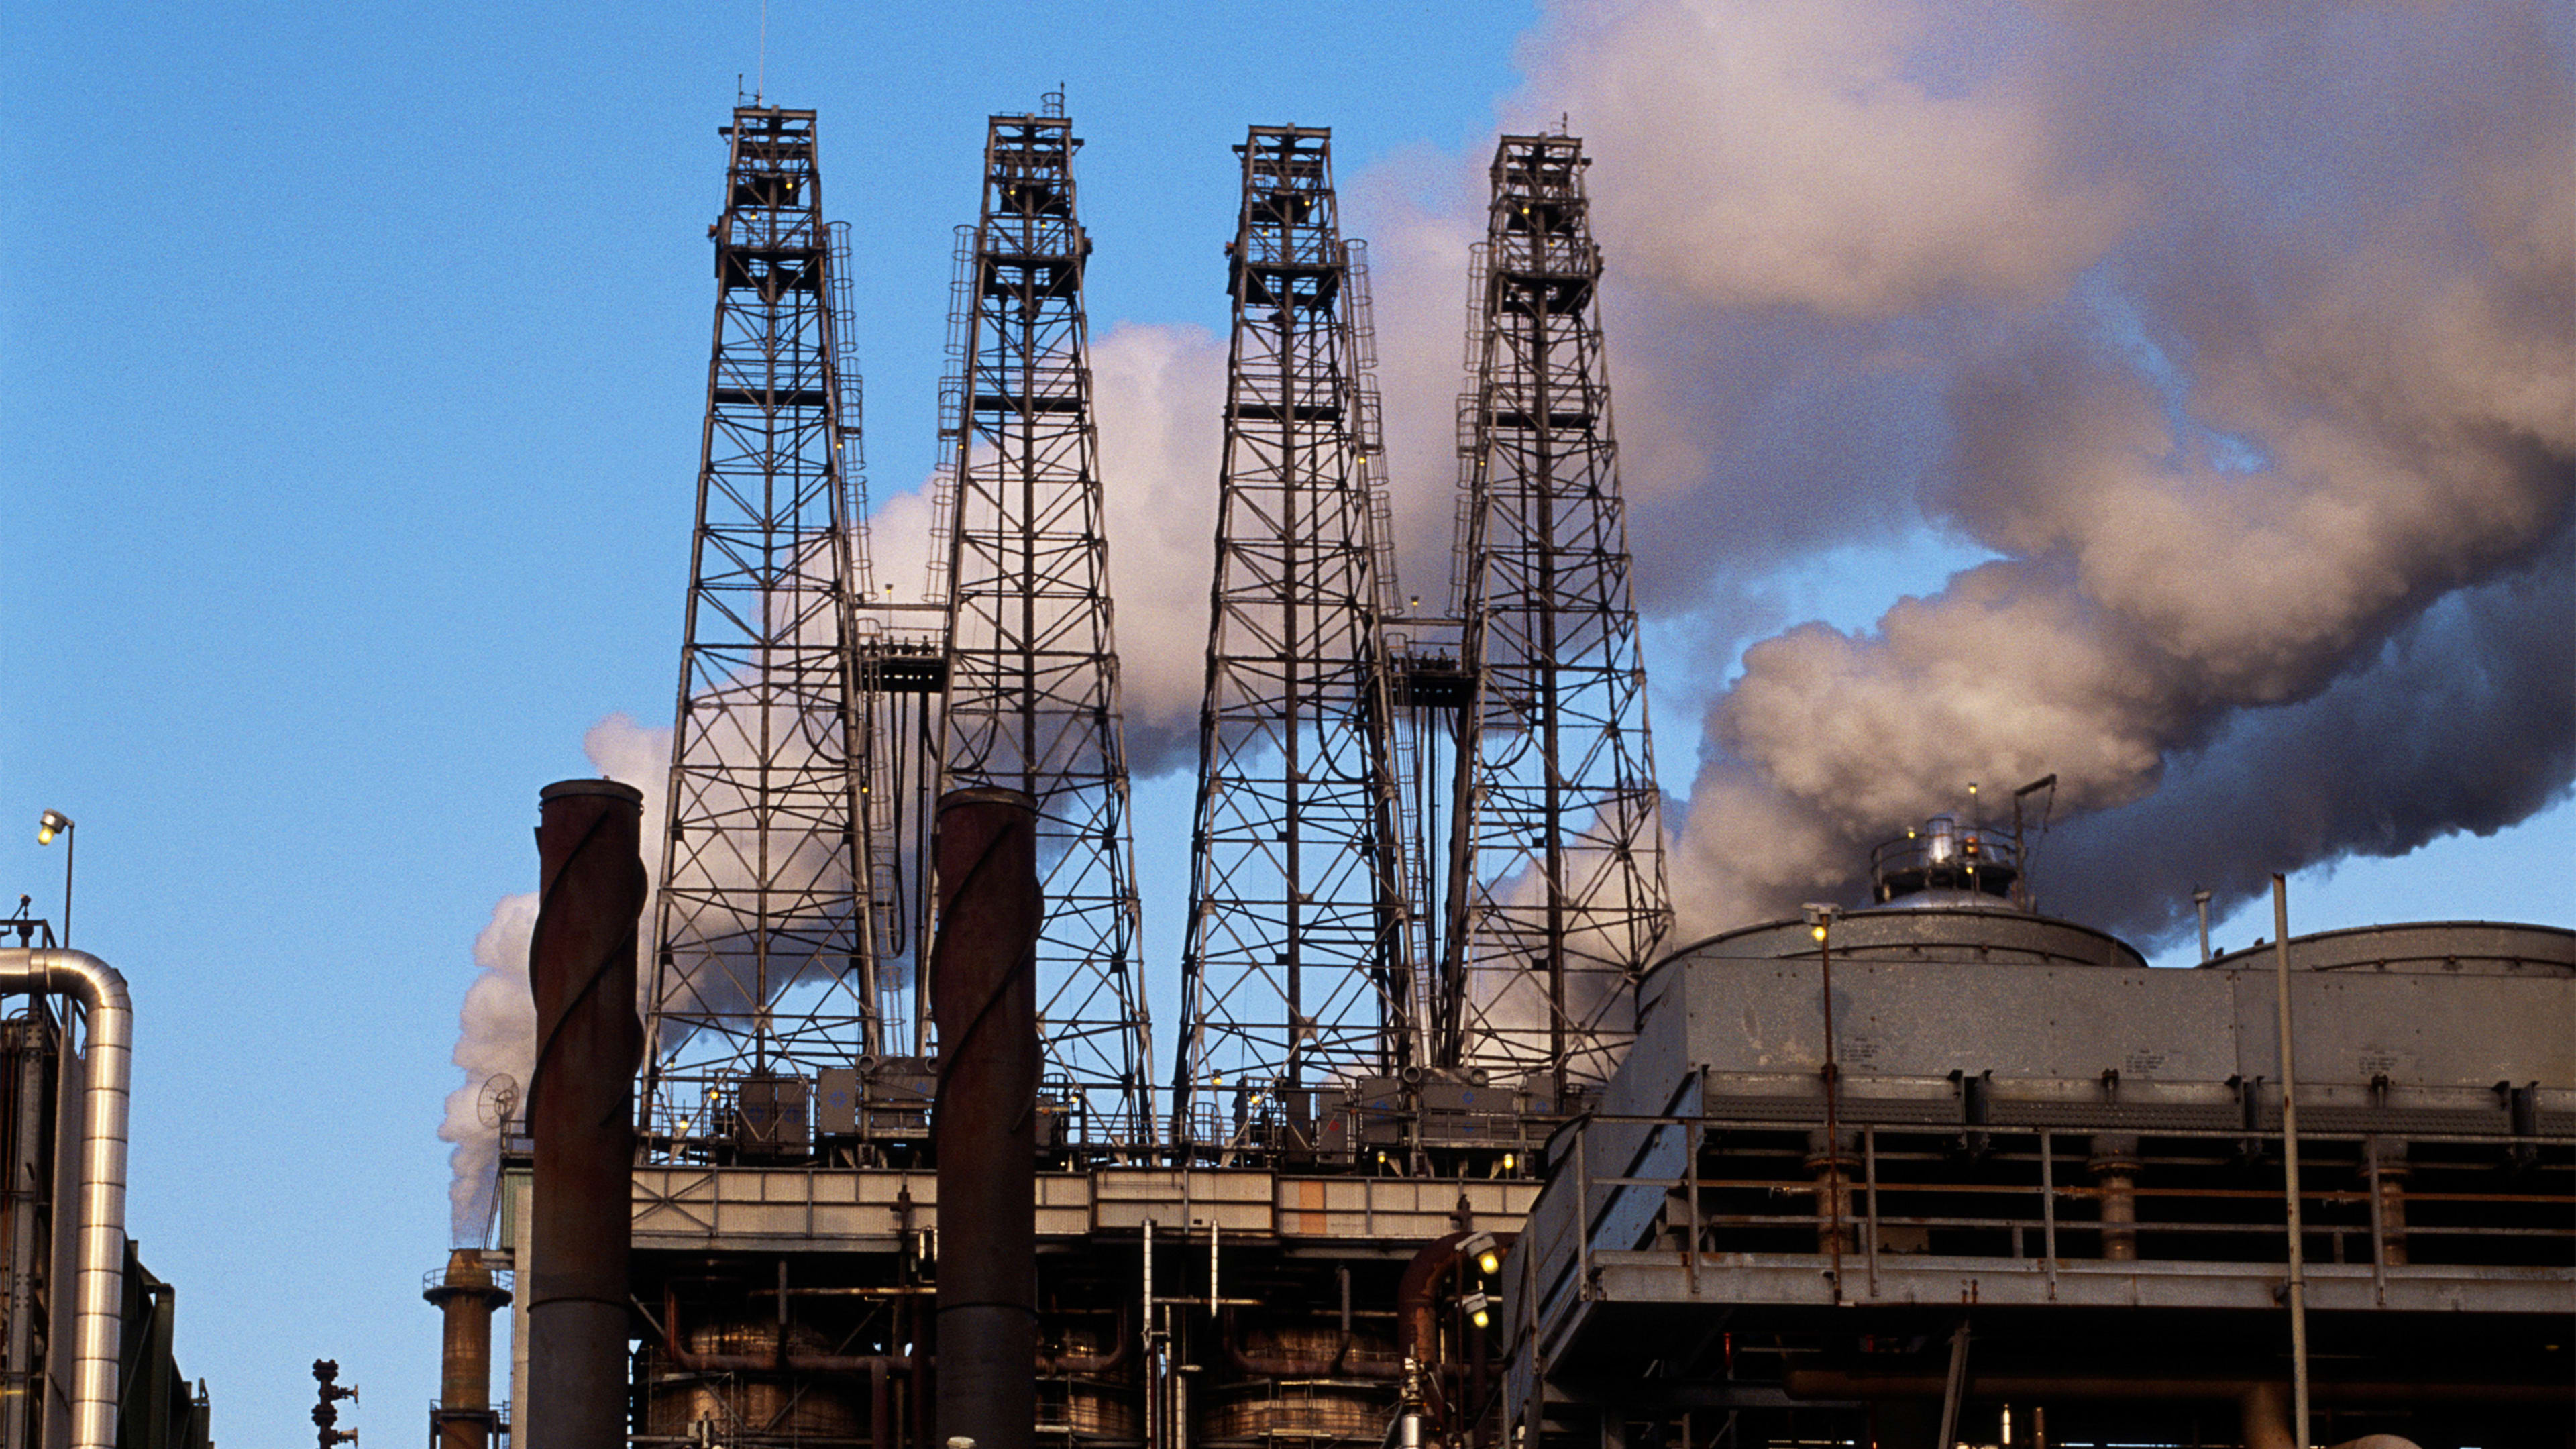 This refinery community is going to ban any new fossil development